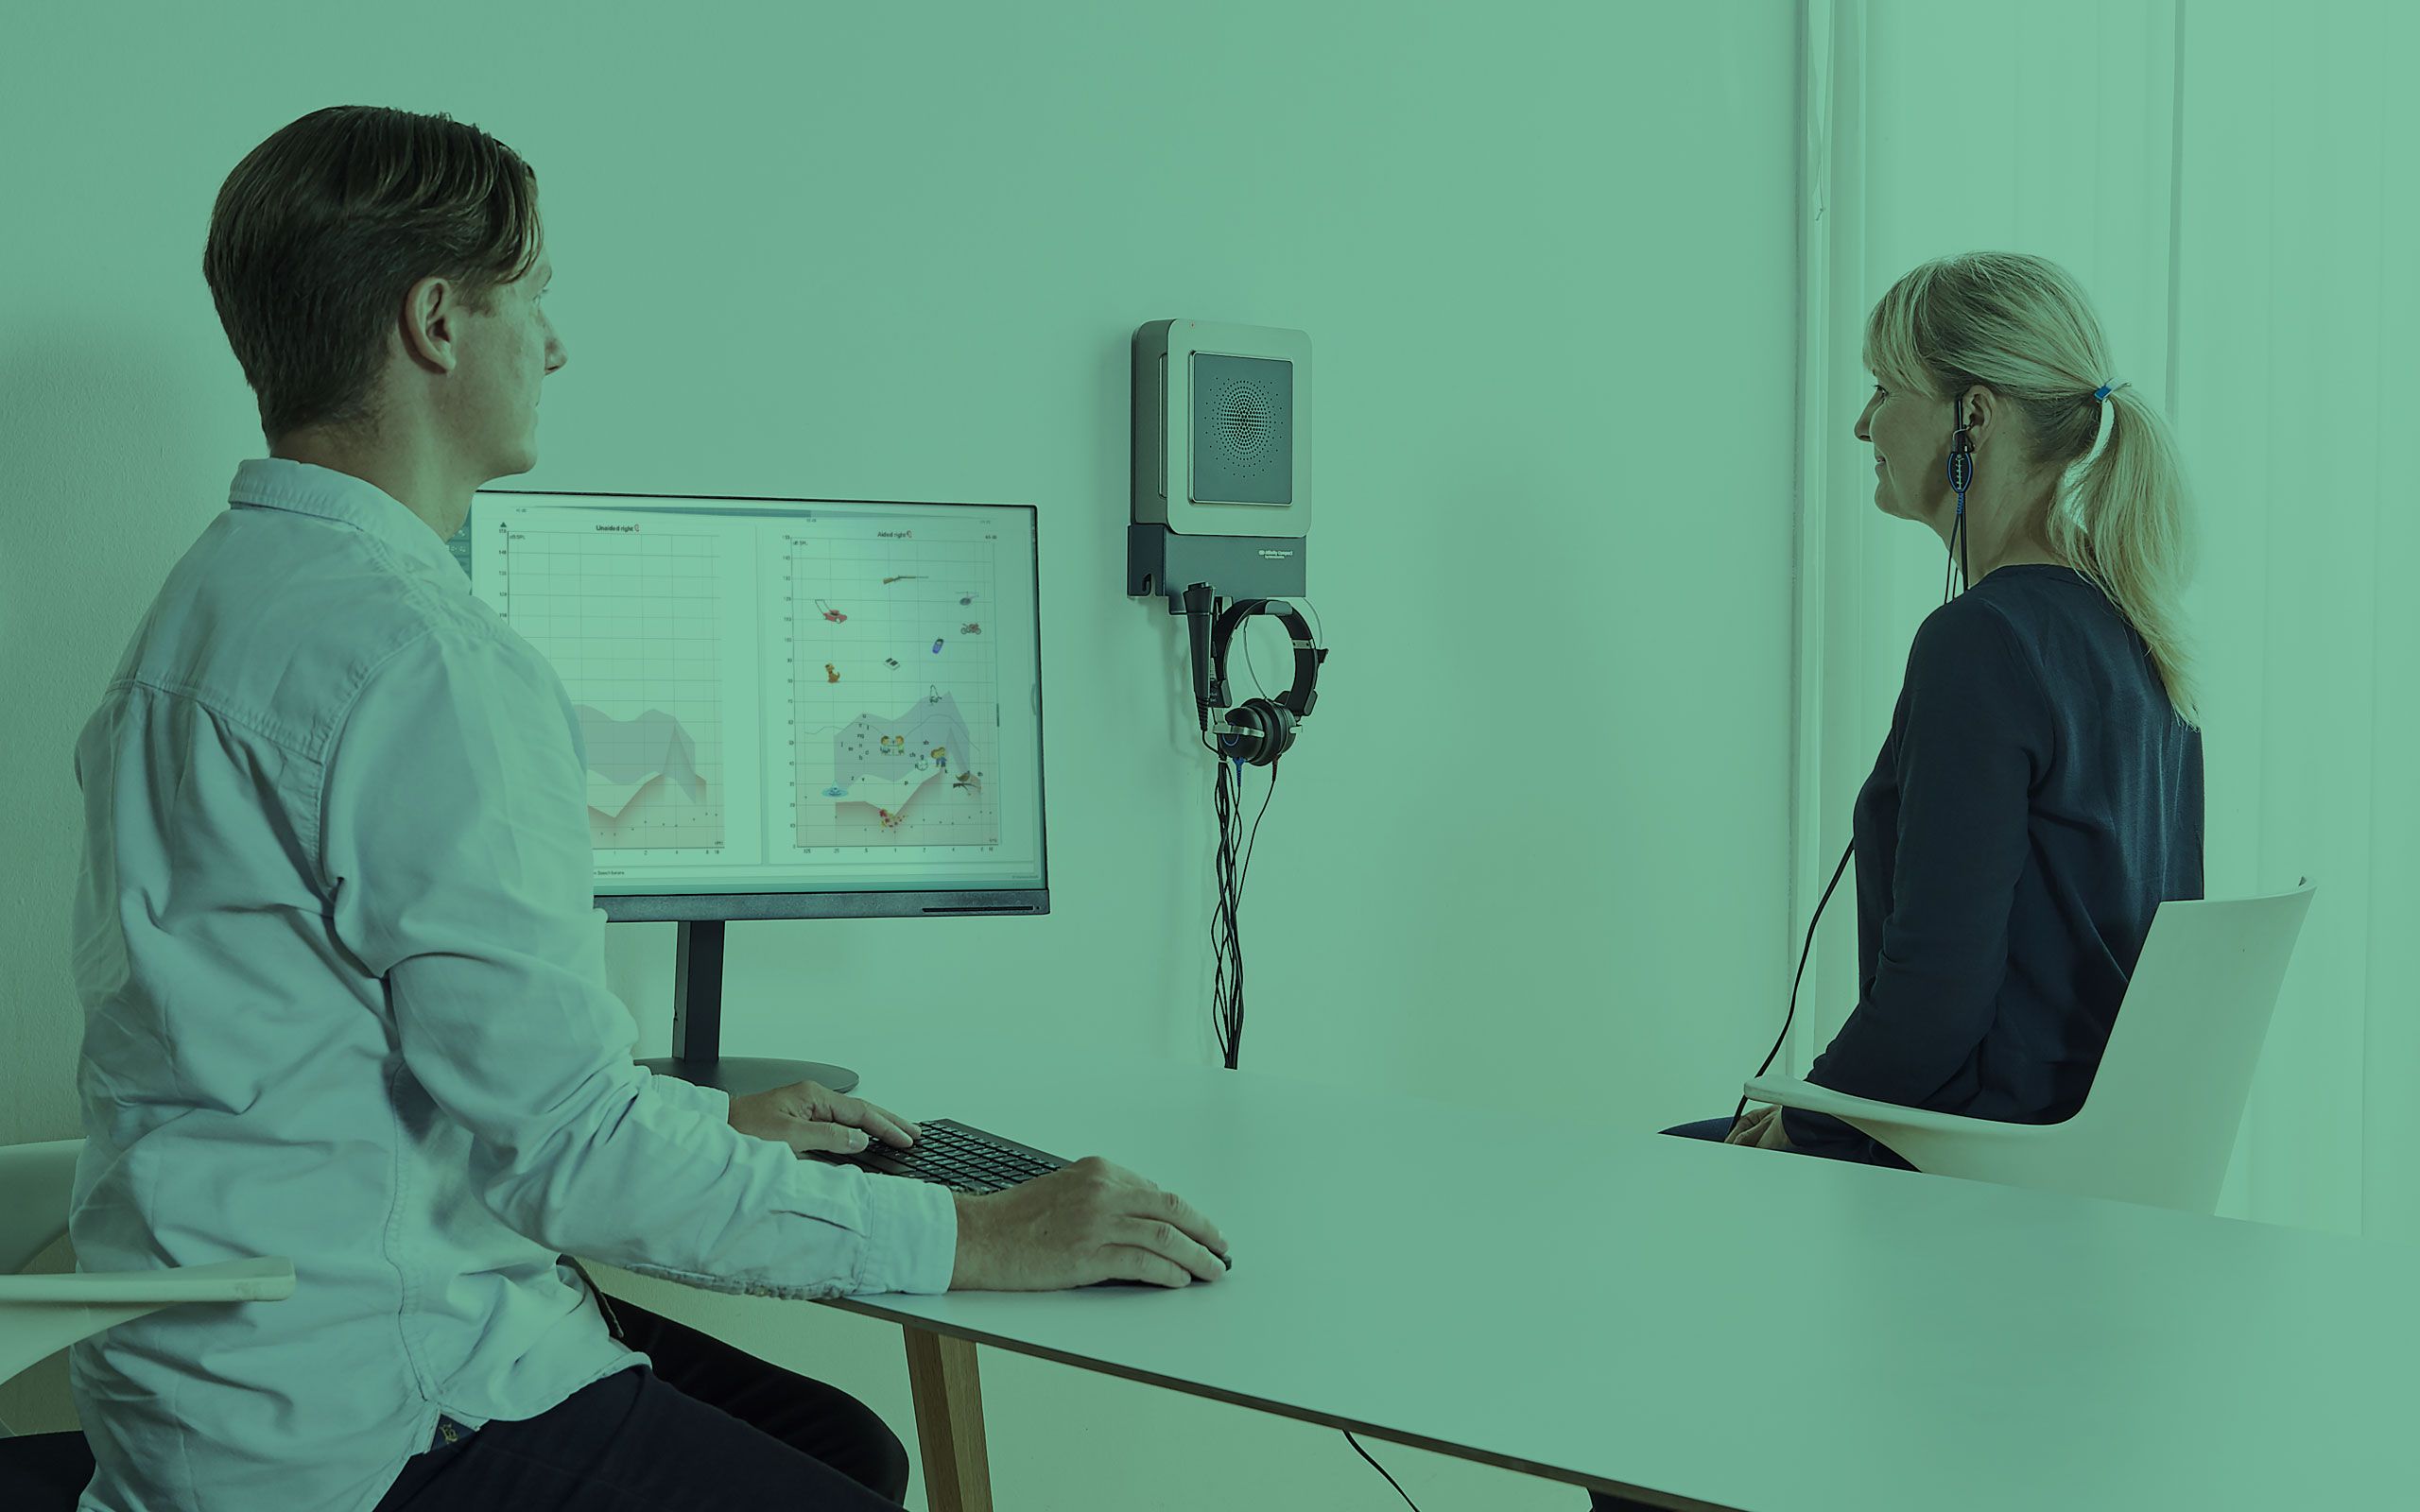 Male clinician and female patient performing visible speech mapping.